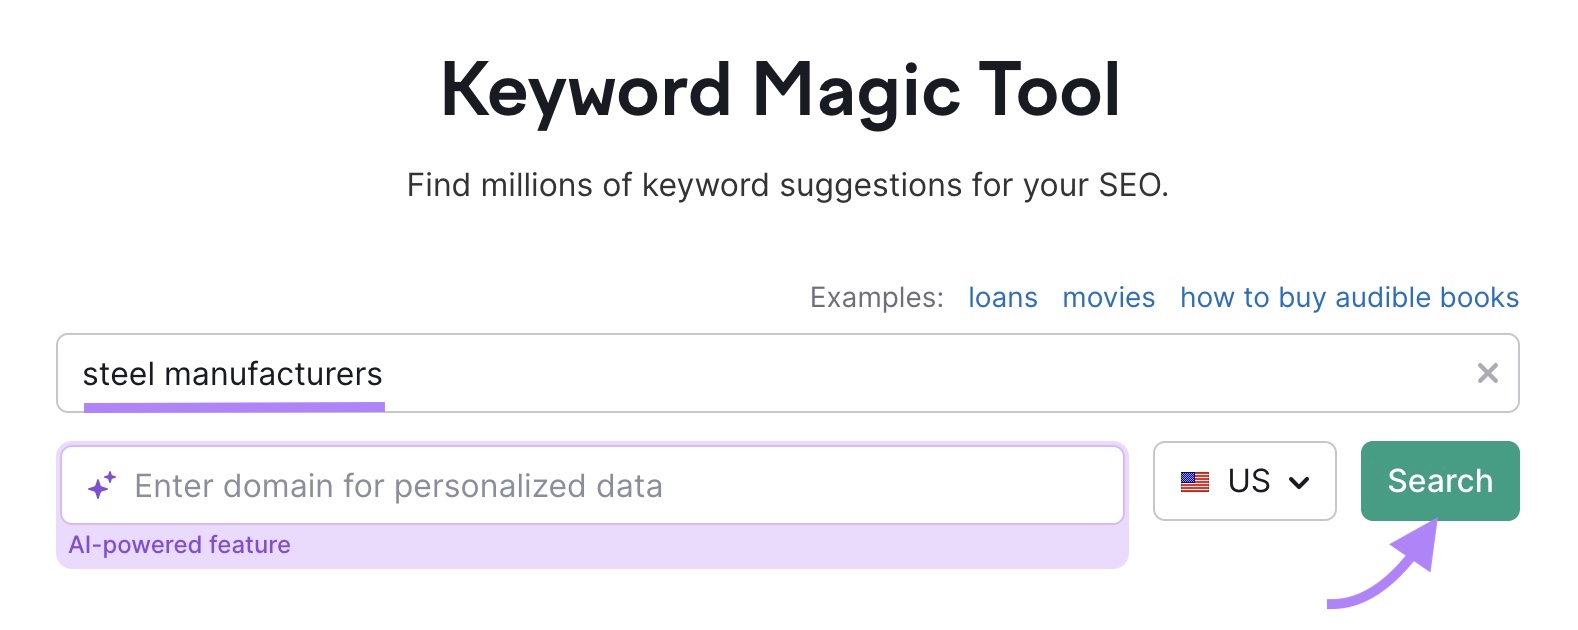 Keyword Magic Tool start with "steel manufacturers" entered and the "Search" button clicked.